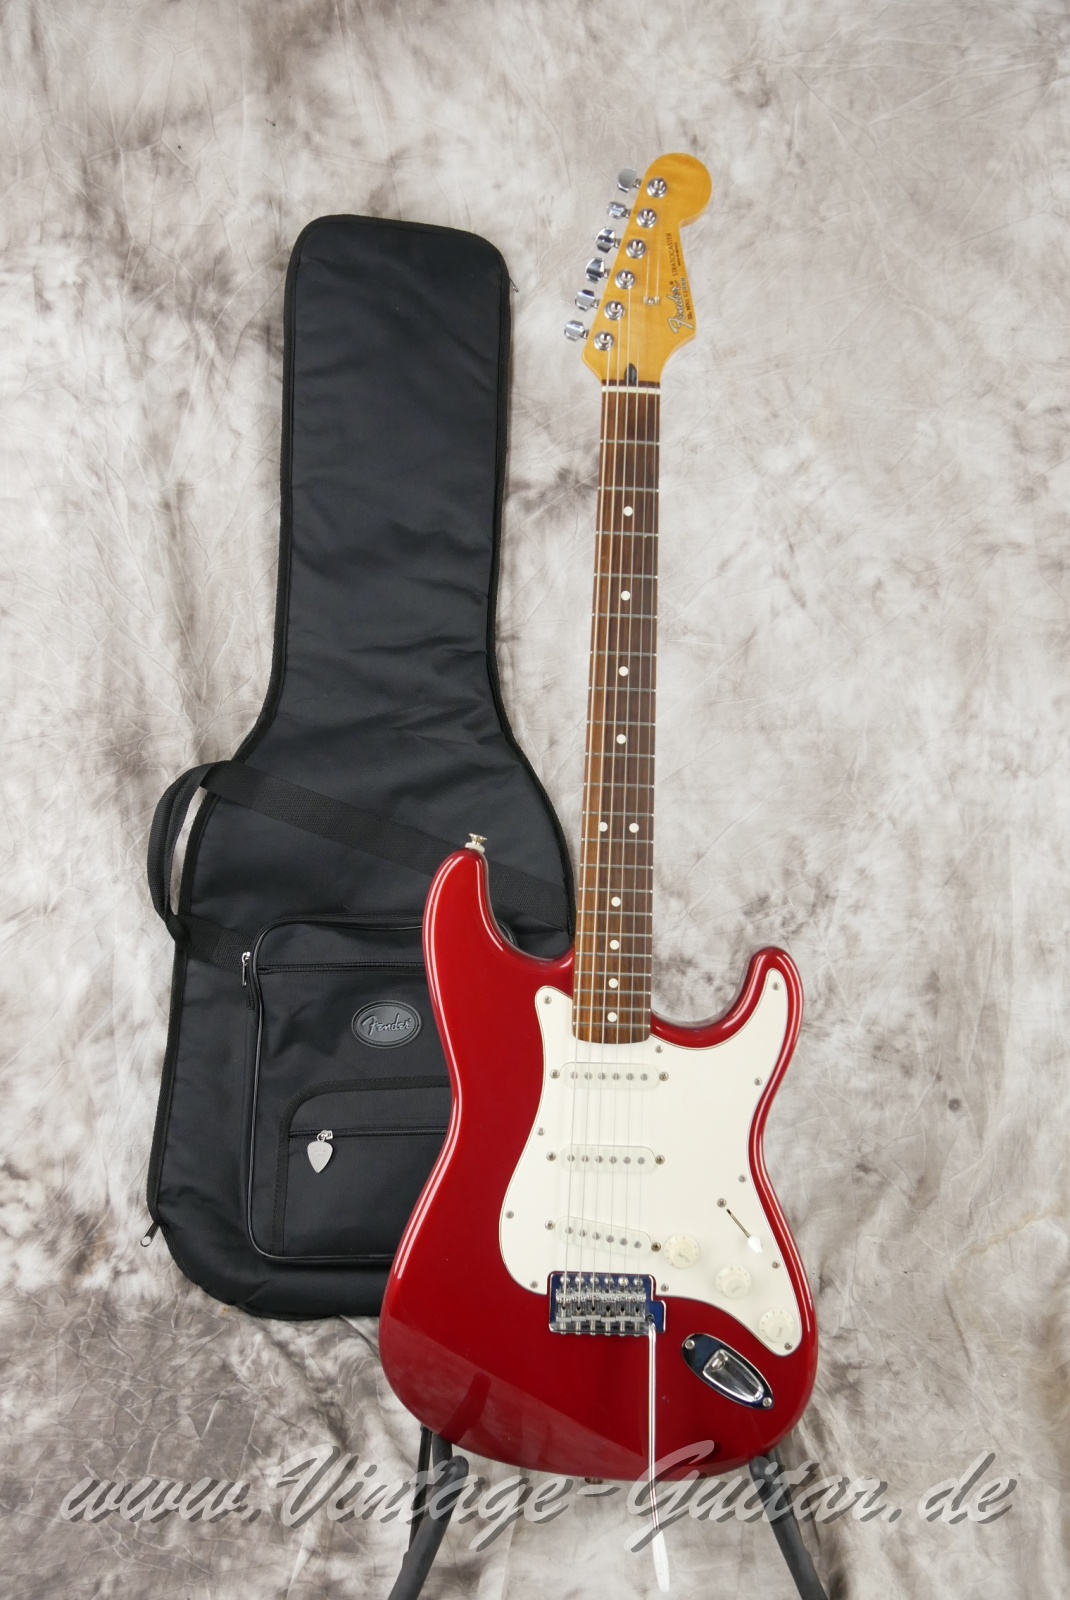 Fender_Stratocaster_Mexico_candy_apple_red_1991-013.JPG